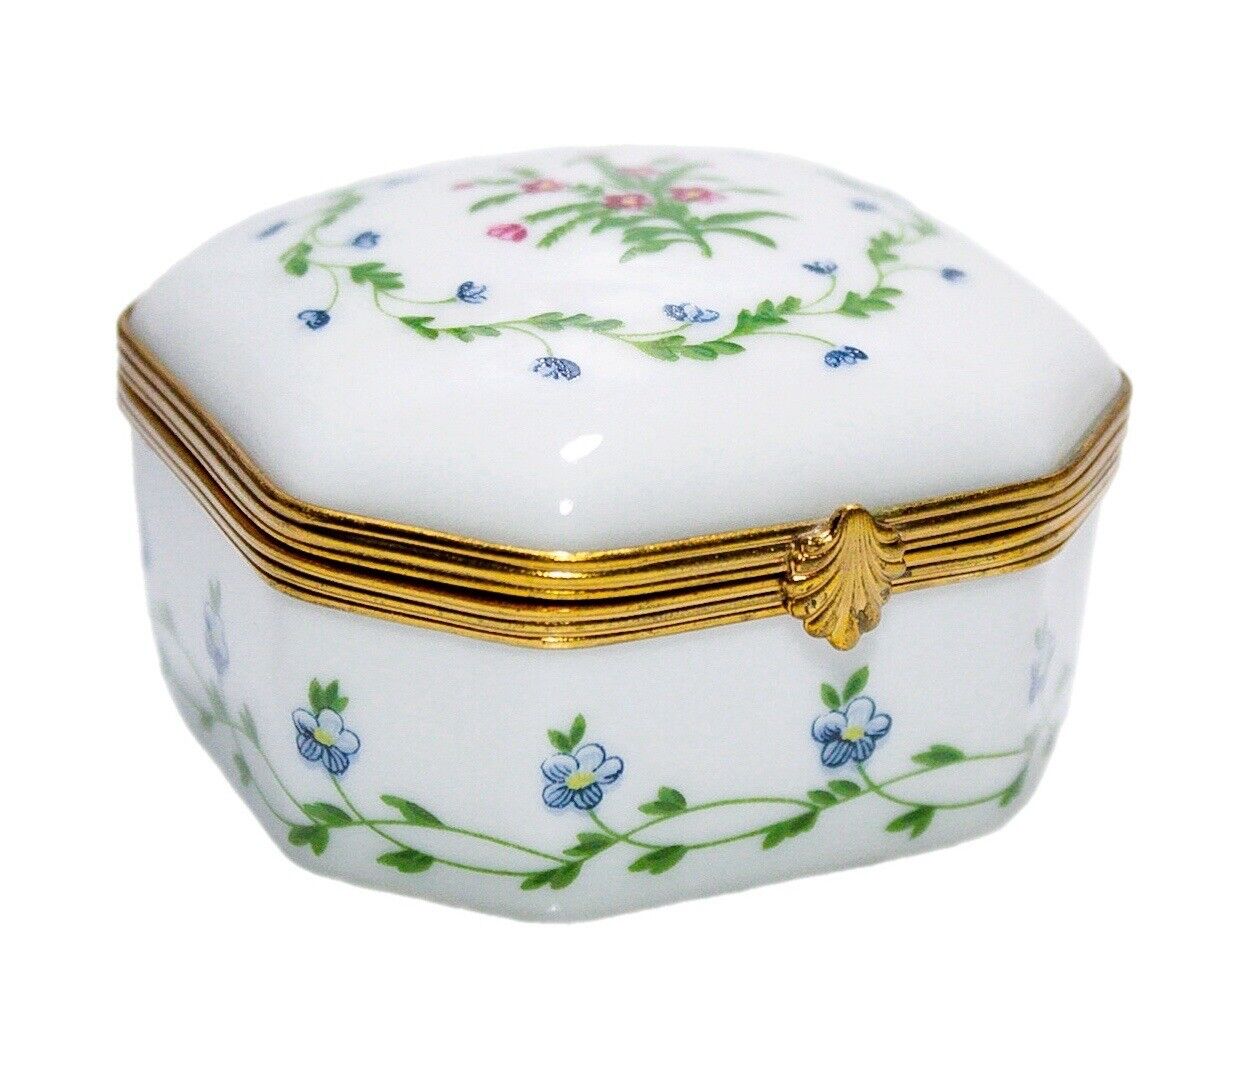 A. RAYNAUD Limoges France Hand Painted Floral Porcelain Trinket/Jewelry Box